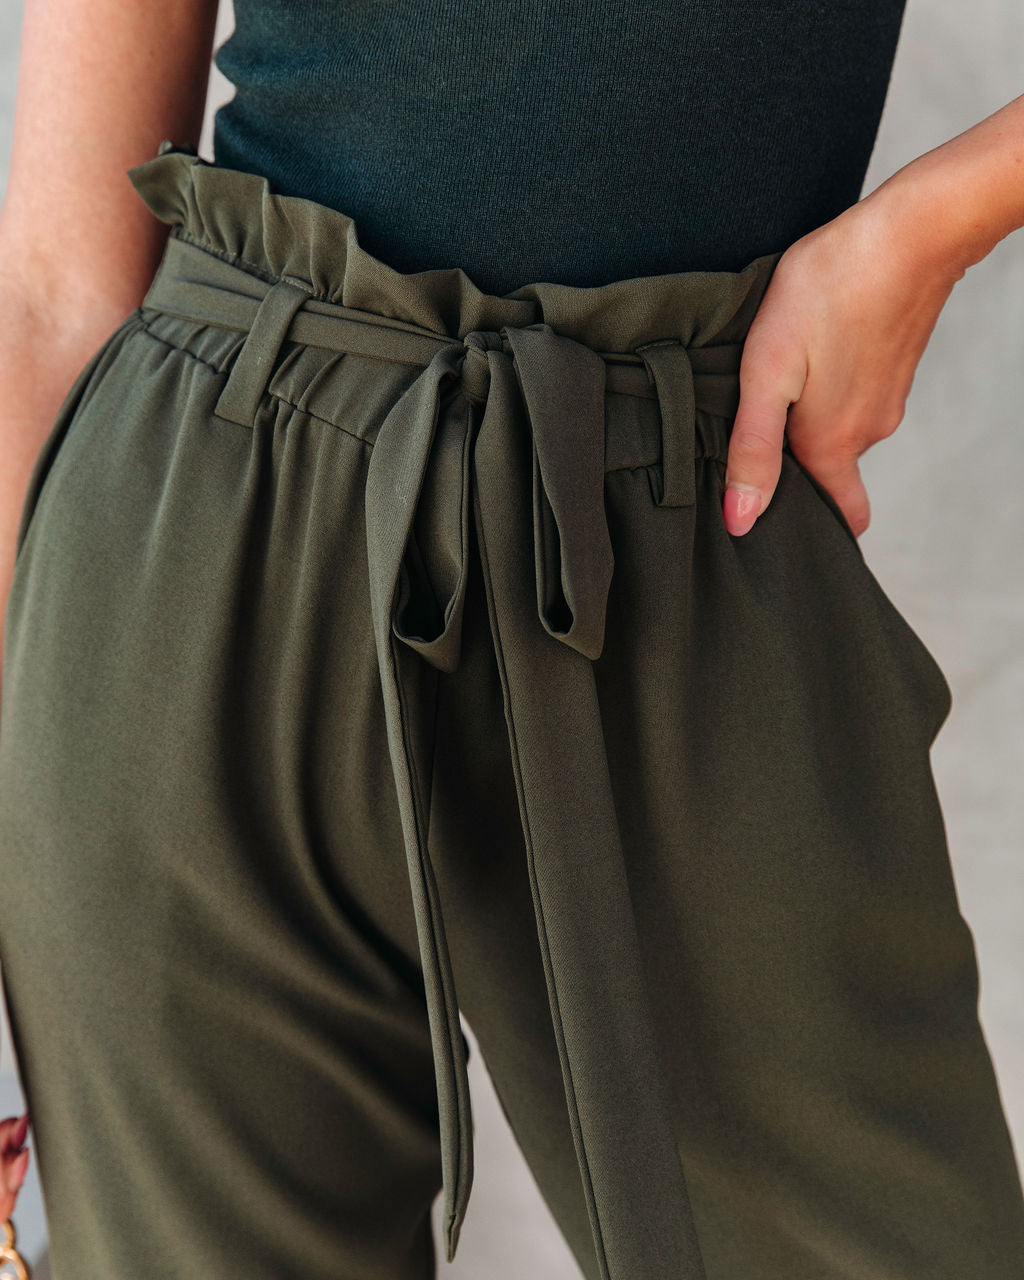 These $25 Paper Bag-Waist Pants Have Over 7,700 5-Star  Reviews